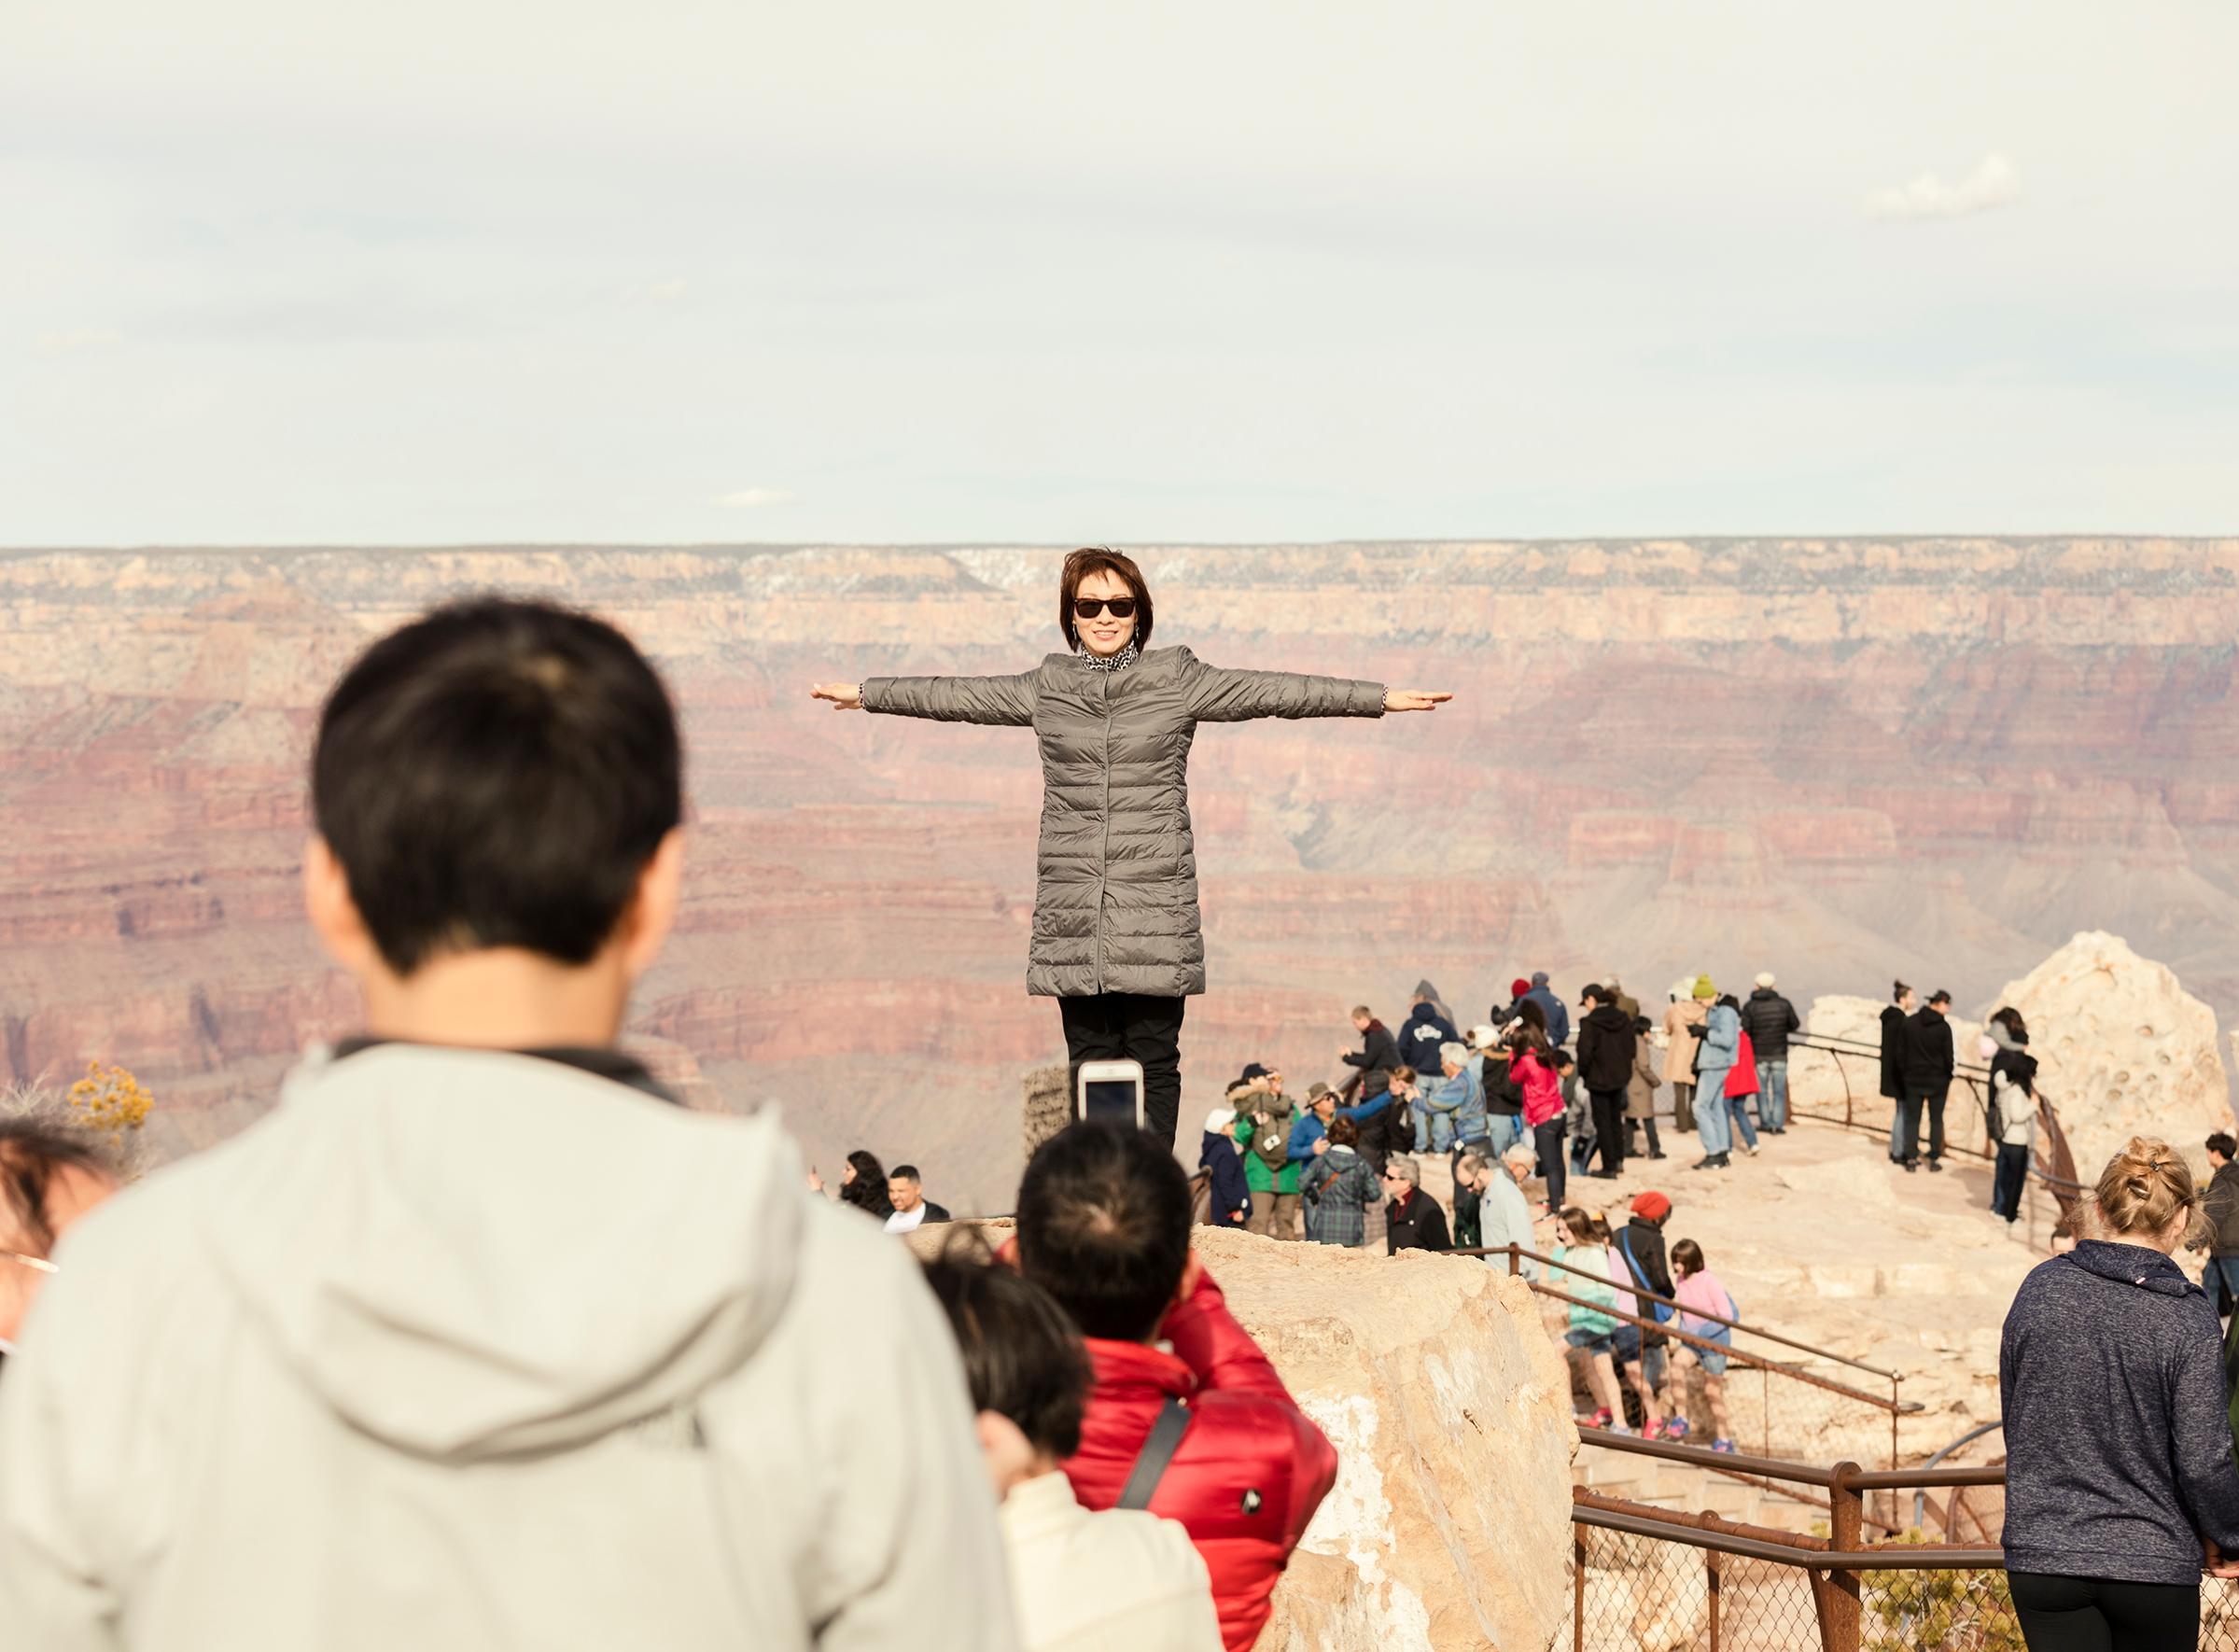 A visitor poses for a photo at Grand Canyon National Park